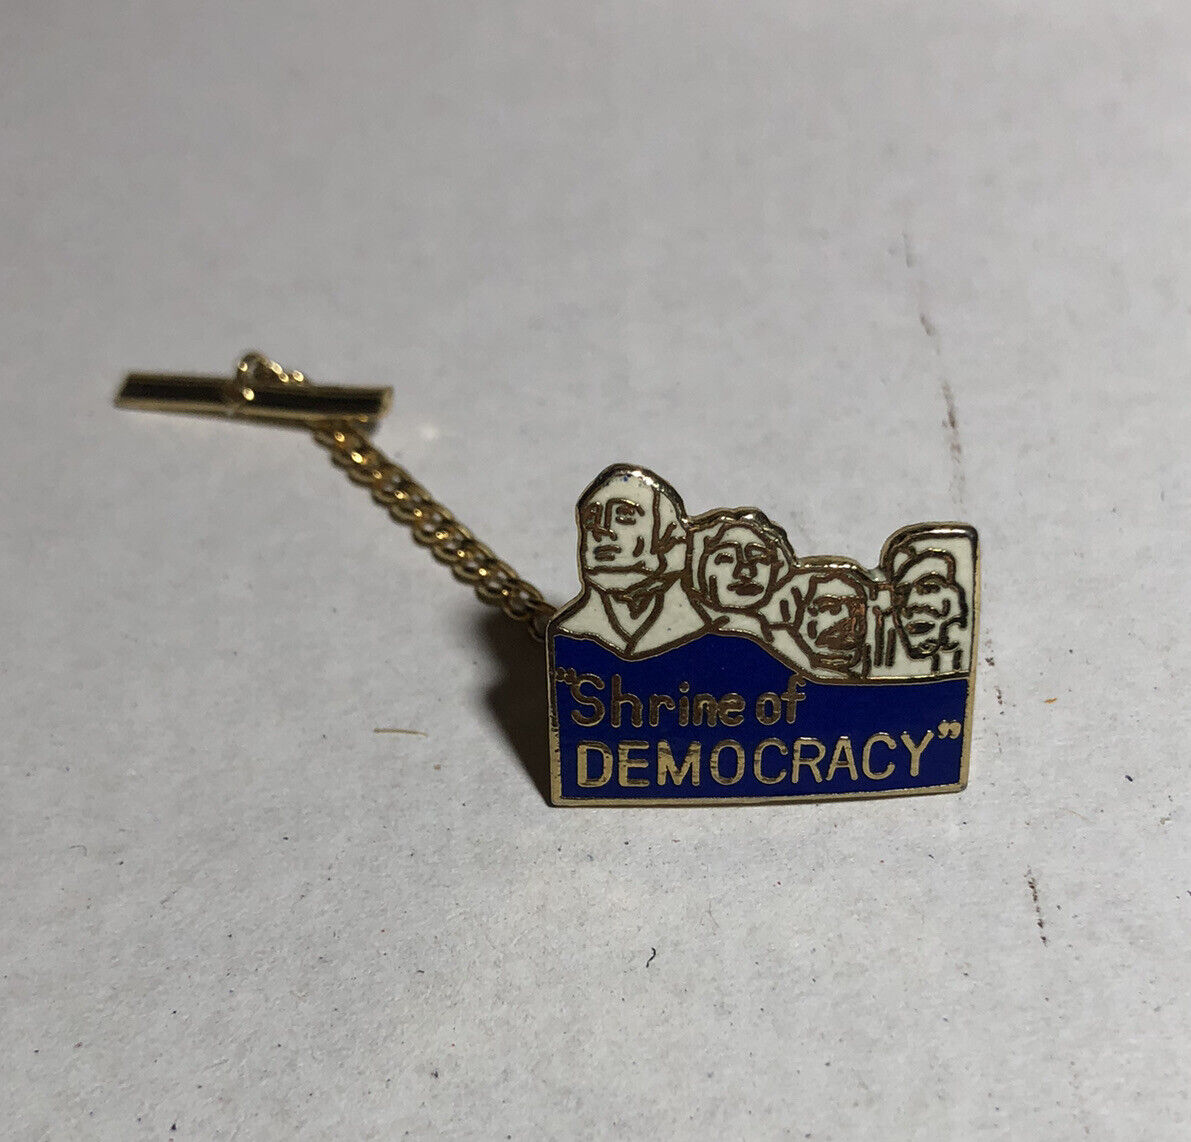 Mount Rushmore Shrine Of Democracy Enamel Lapel Pin with Chain